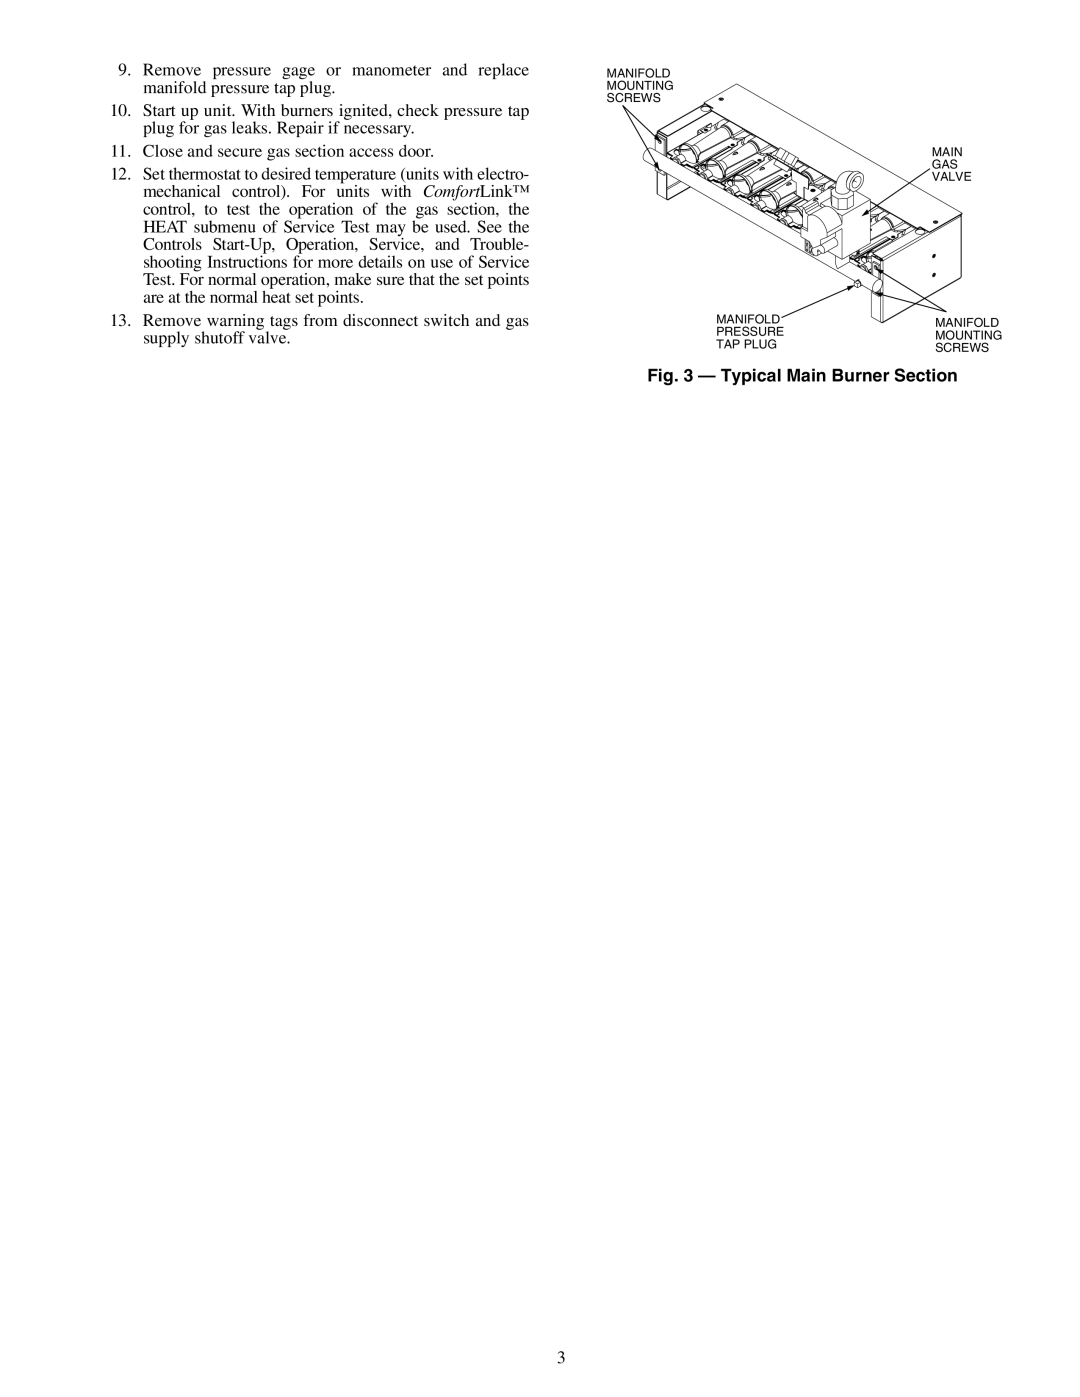 Carrier 48PG16 installation instructions Typical Main Burner Section 